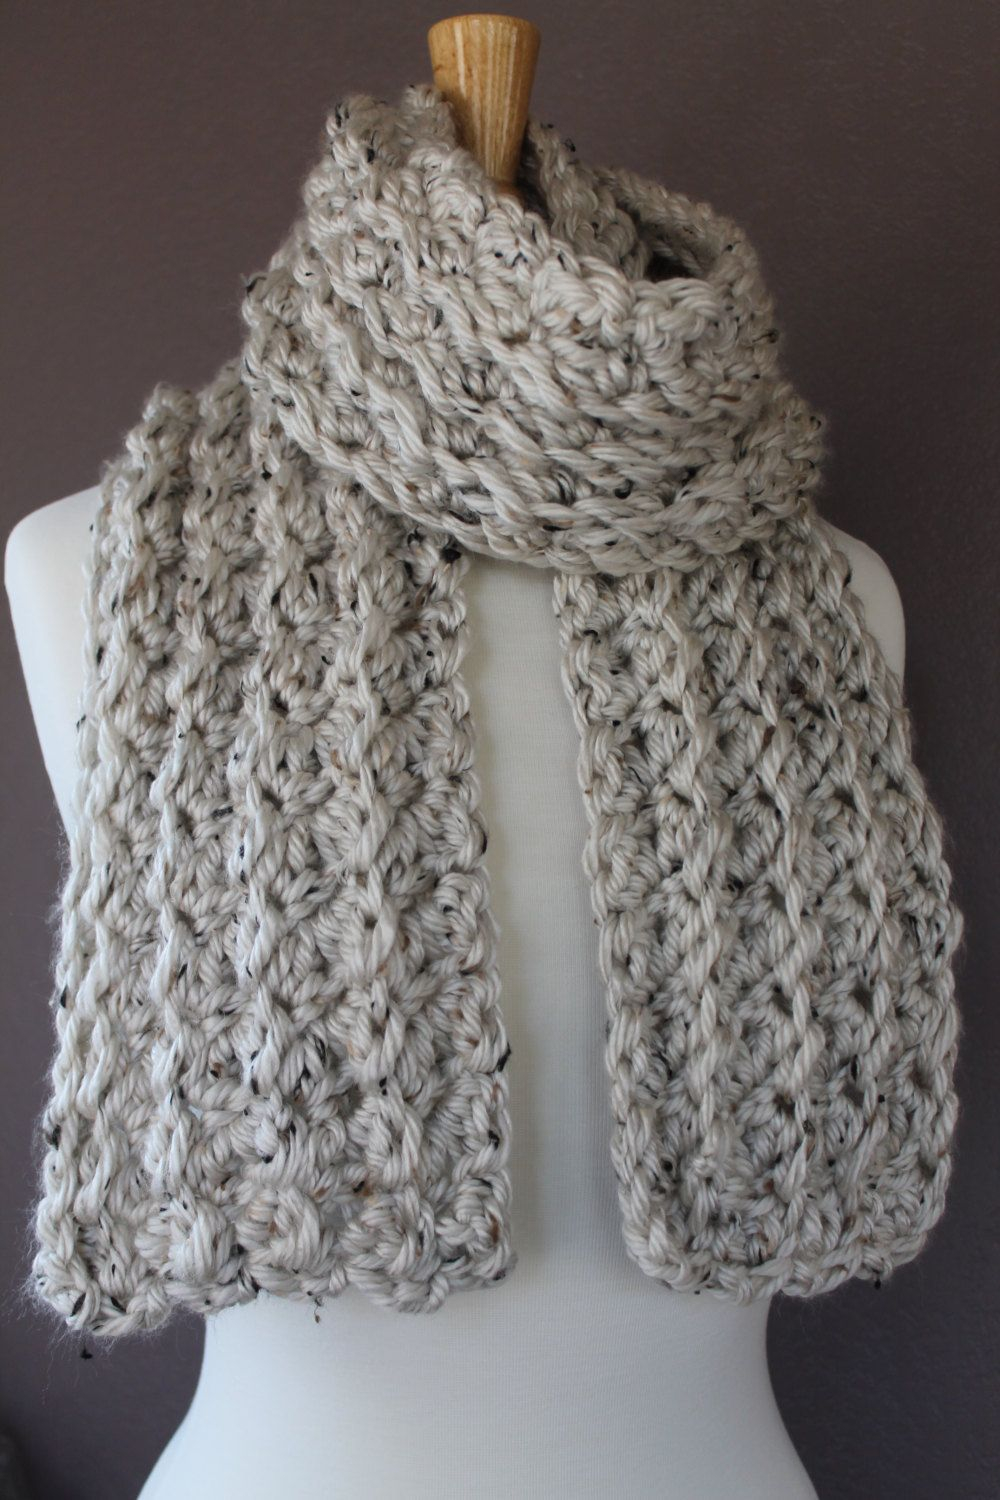 Chunky Crochet Scarf Pattern Come And Check Out This Very Easy Crochet Scarf Pattern From Crafty